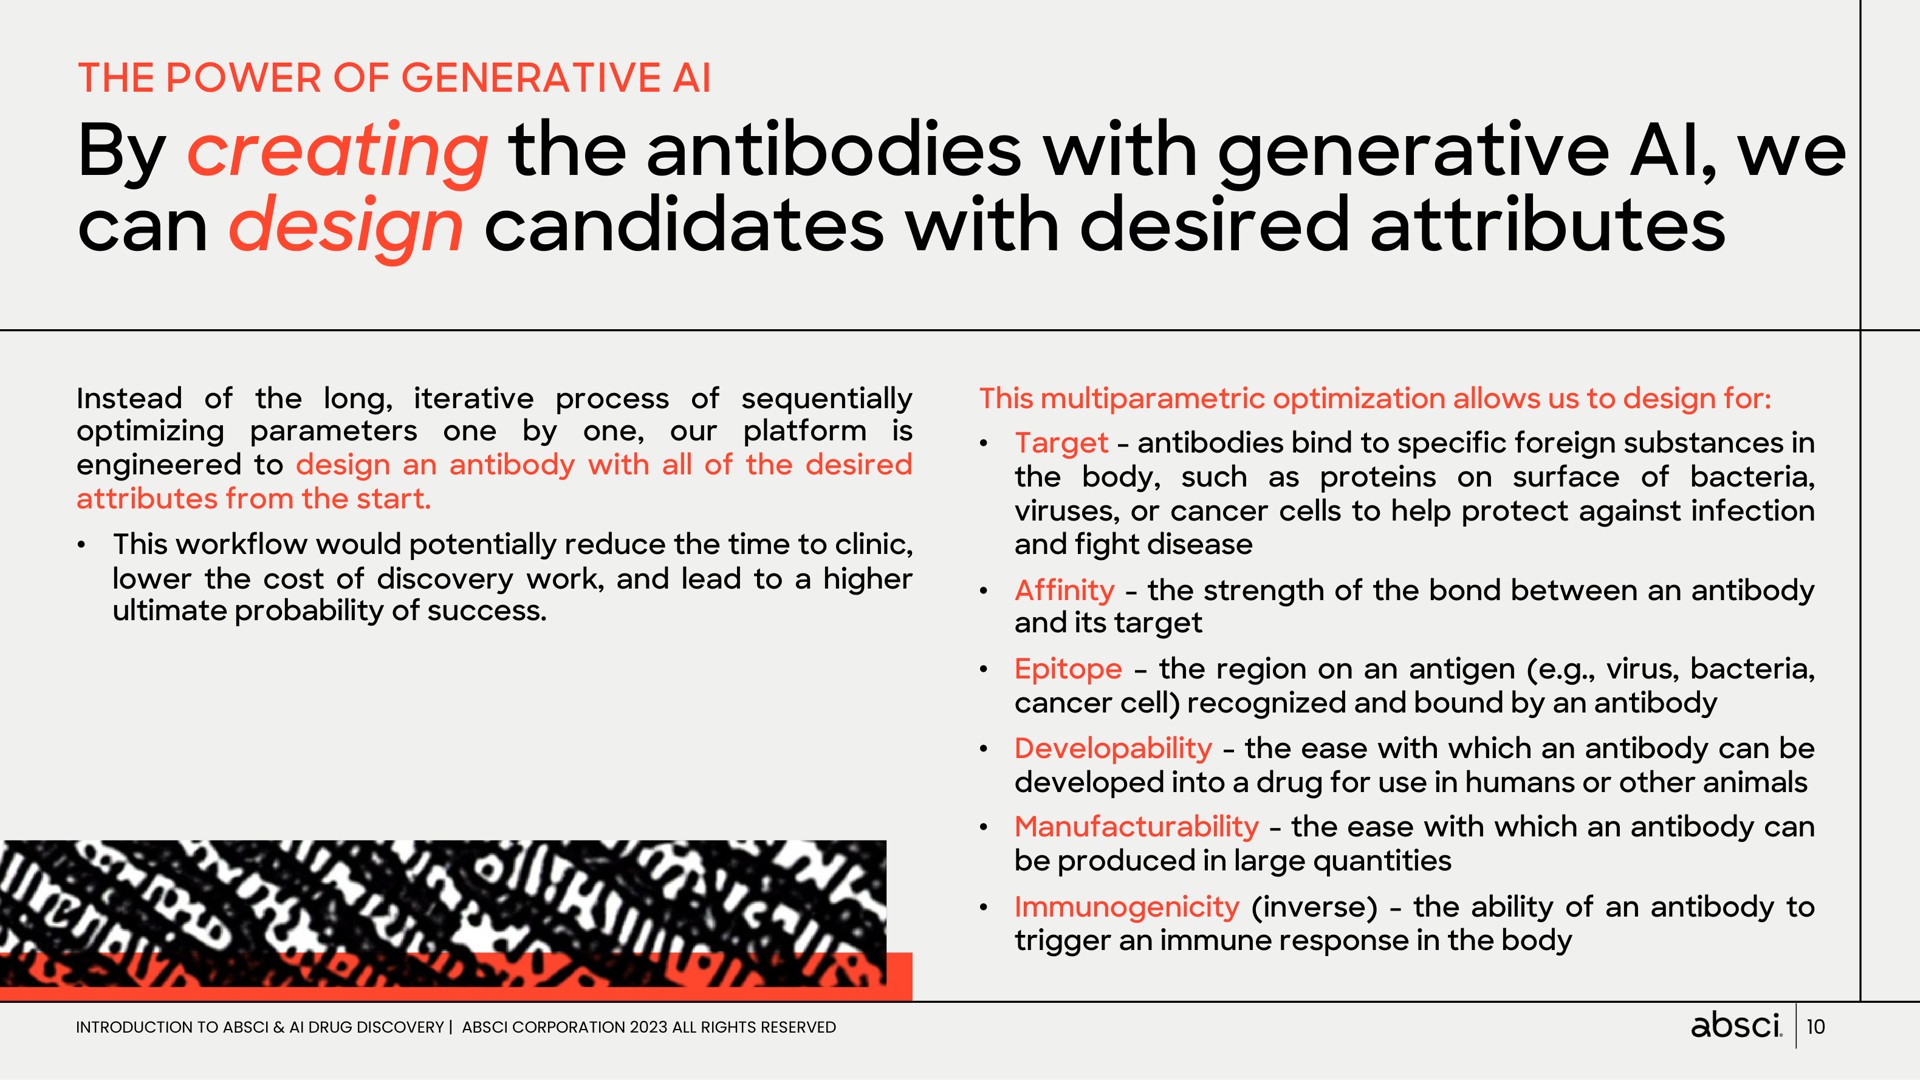 the power of generative by creating the antibodies with generative we can design candidates with desired attributes | Absci